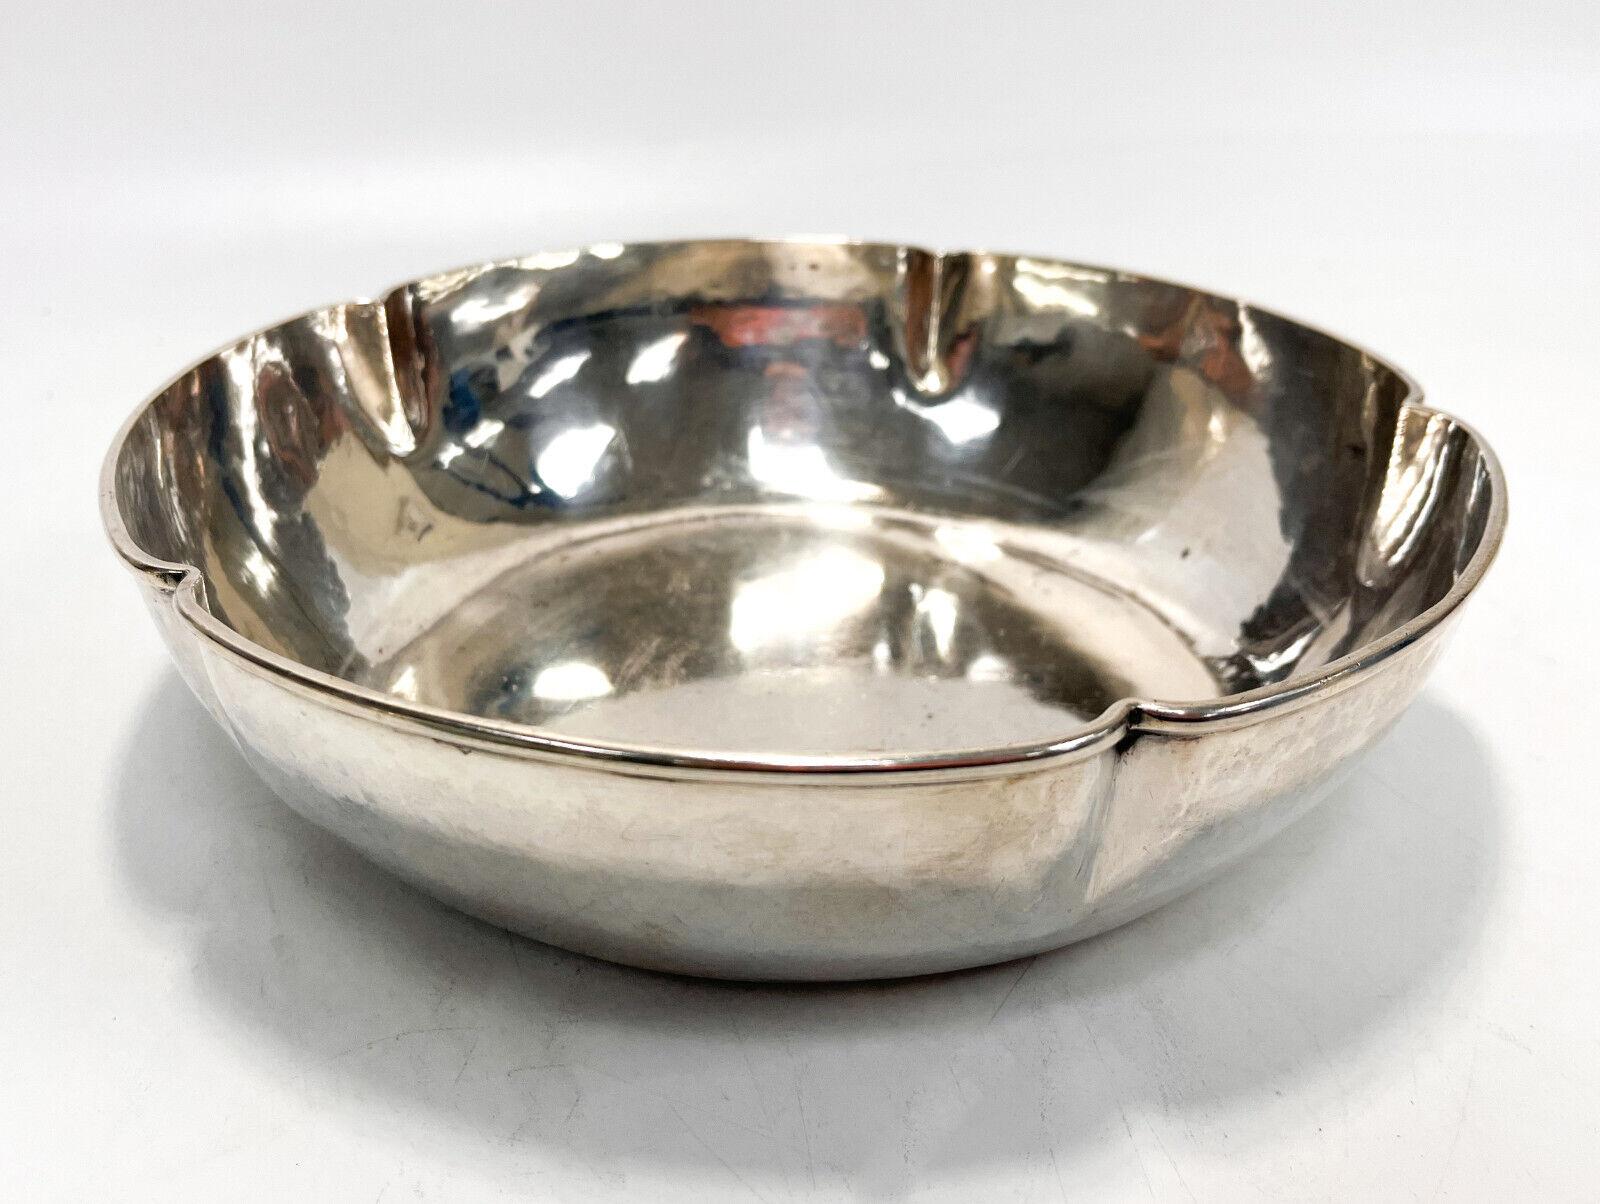  The Kalo Shops Sterling Silver Hand Wrought Scalloped Bowl #40, circa 1920 In Good Condition For Sale In Gardena, CA